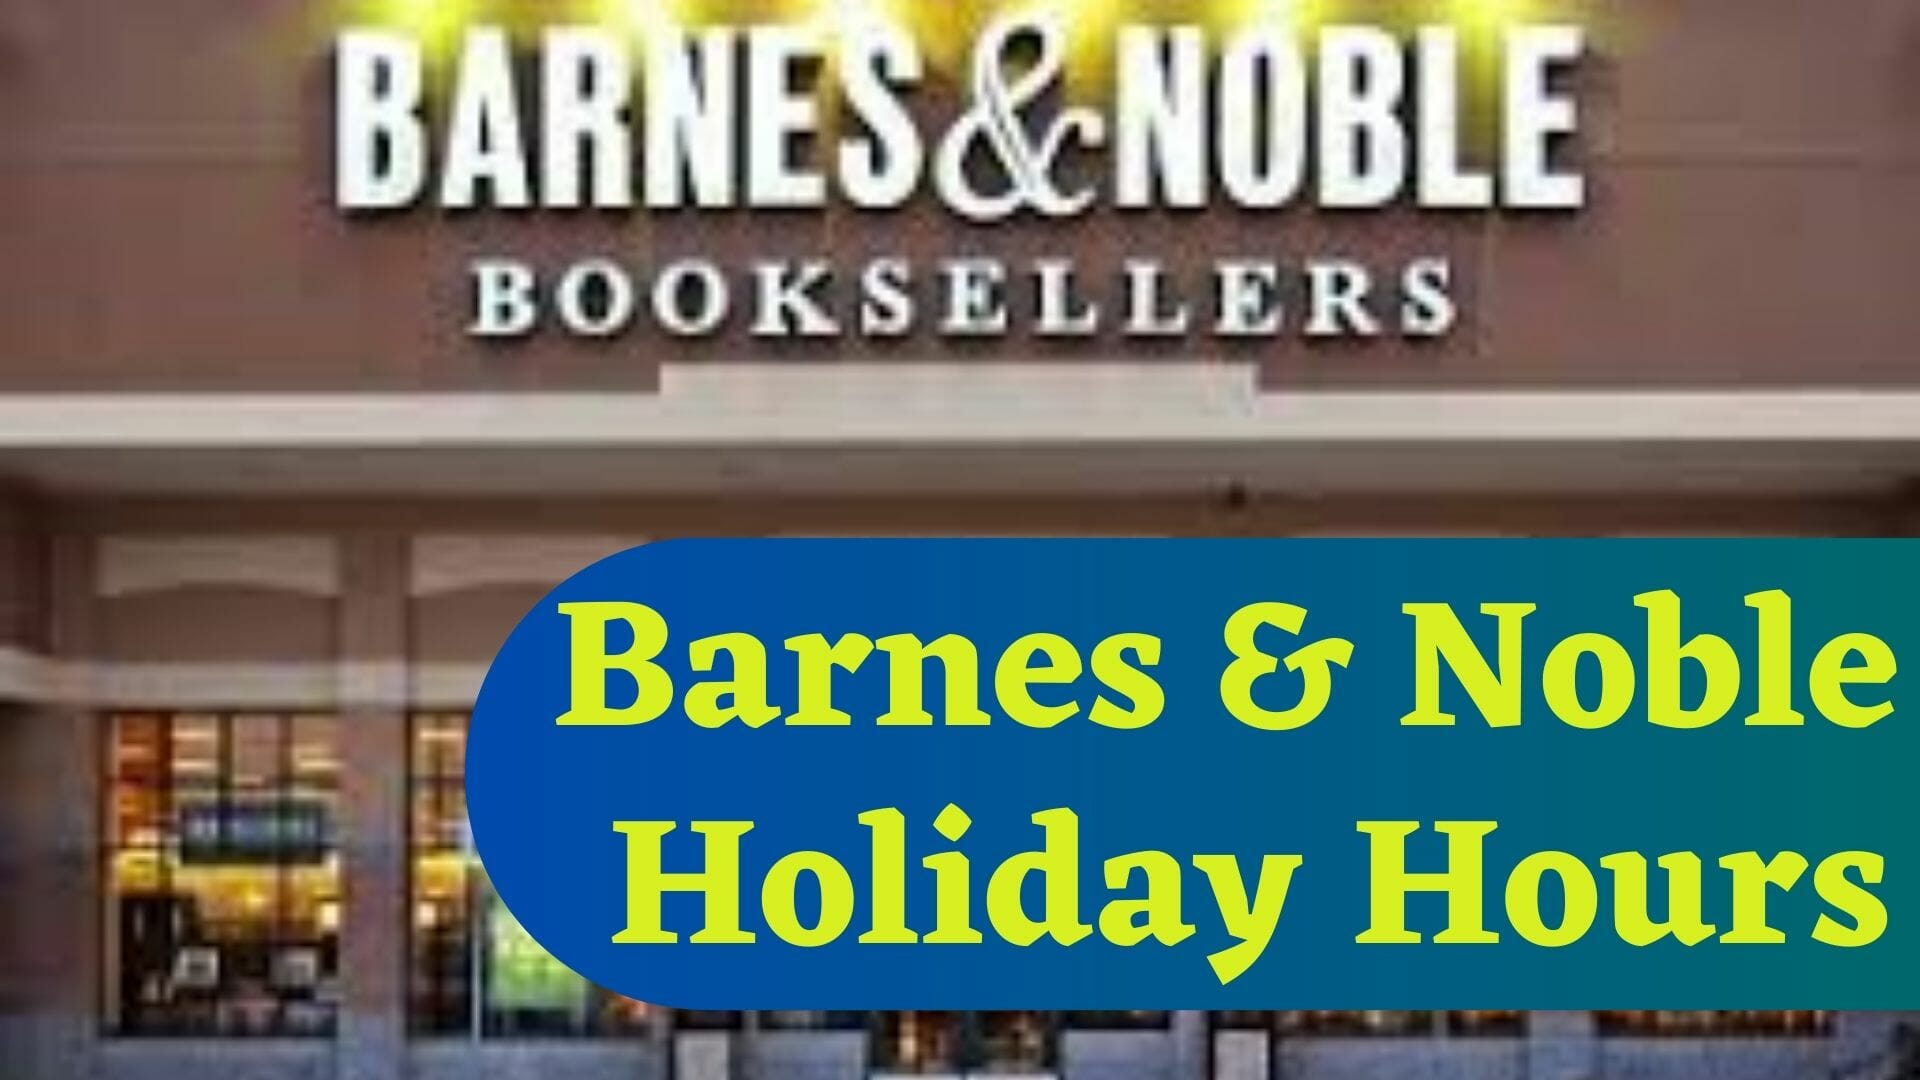 Barnes & Noble Holiday Hours